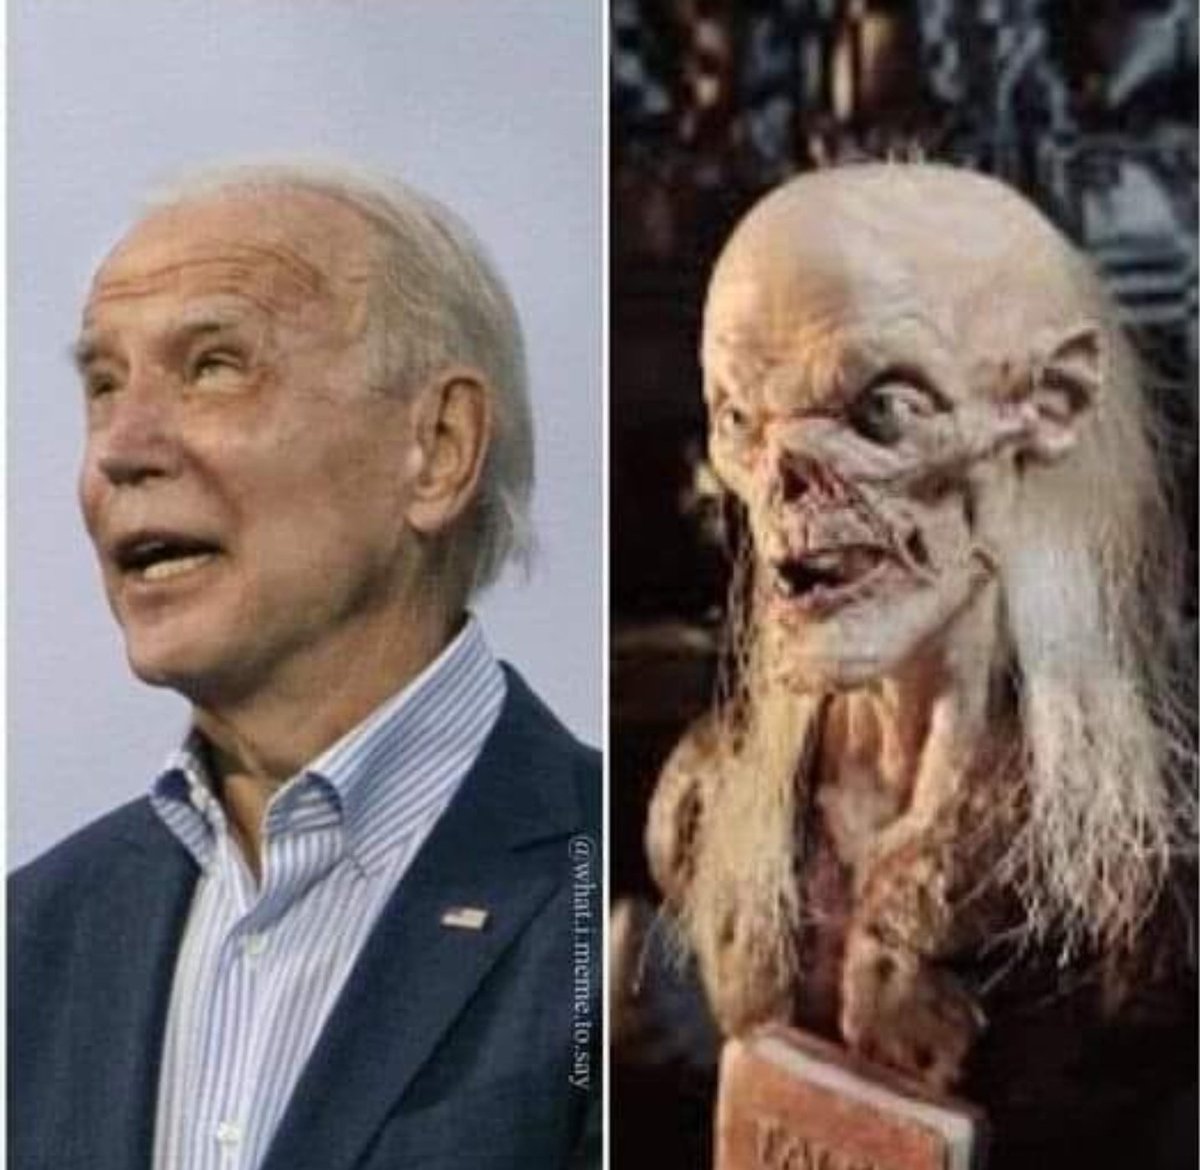 I'll never unsee it 🤣🤣🤣🤣🤣🤣🤣🤣#BidenCrimeFamilly twins...........